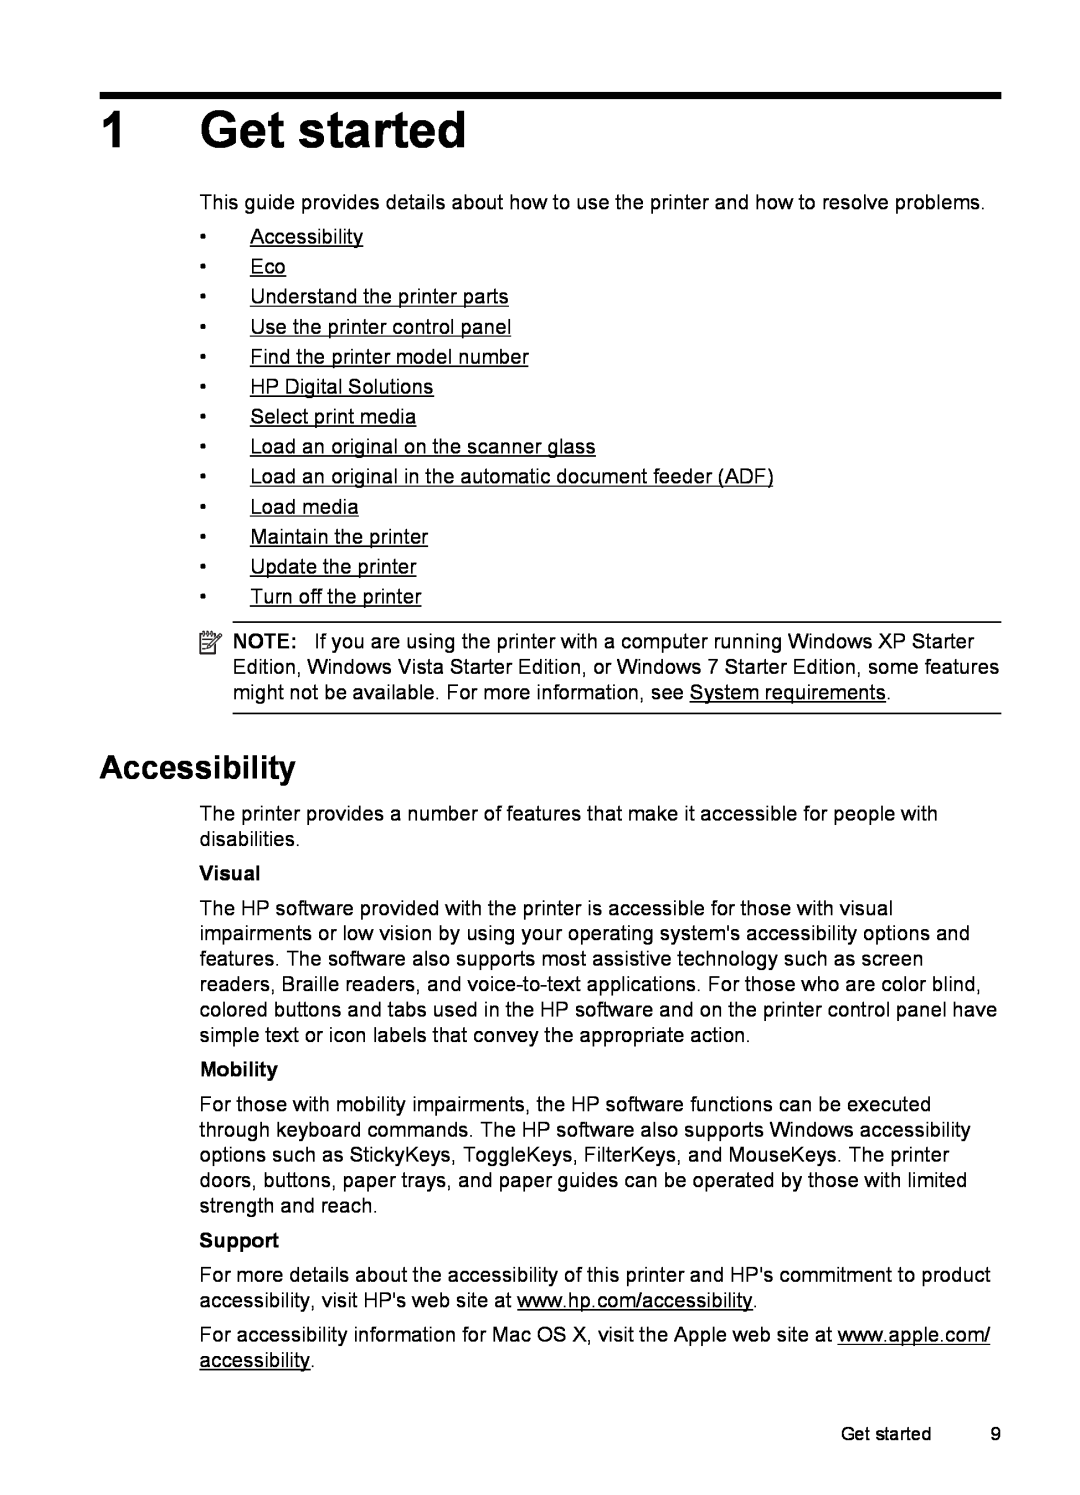 HP 6600 - H7 manual Get started, Accessibility, Visual, Mobility, Support 